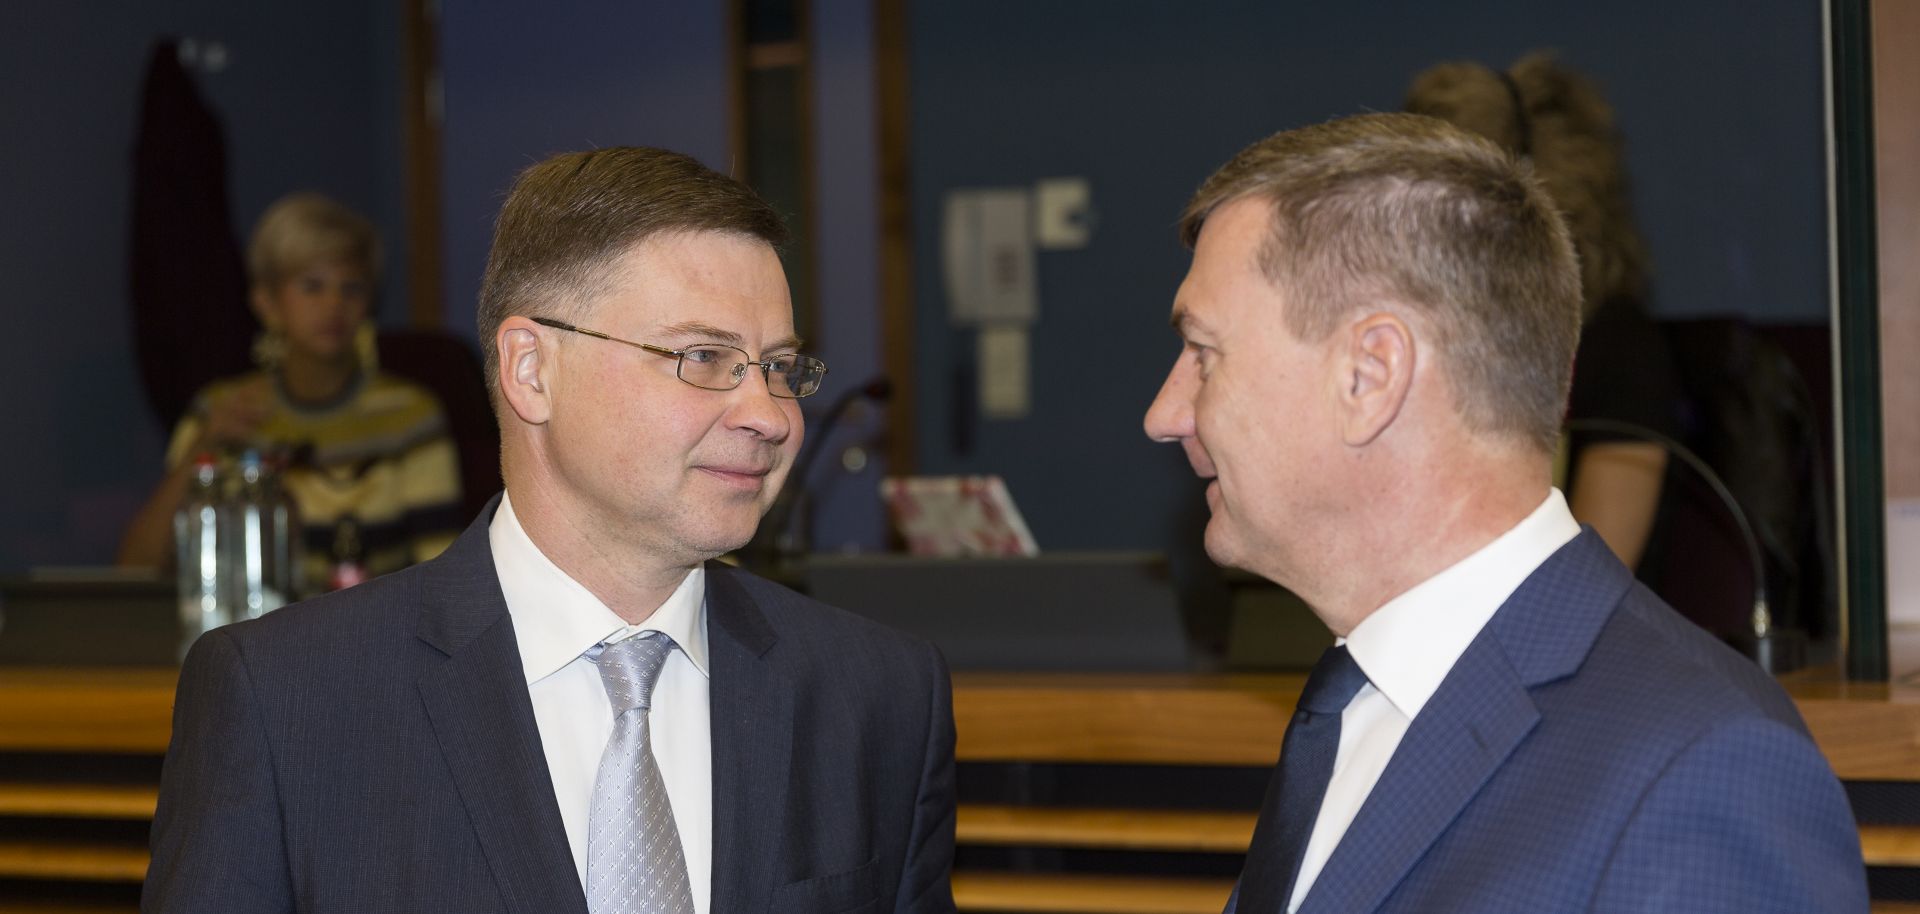 EU Euro & Social Dialogue Commissioner Valdis Dombrovskis is talking with the EU Digital Single Market Commissioner Andrus Ansip.